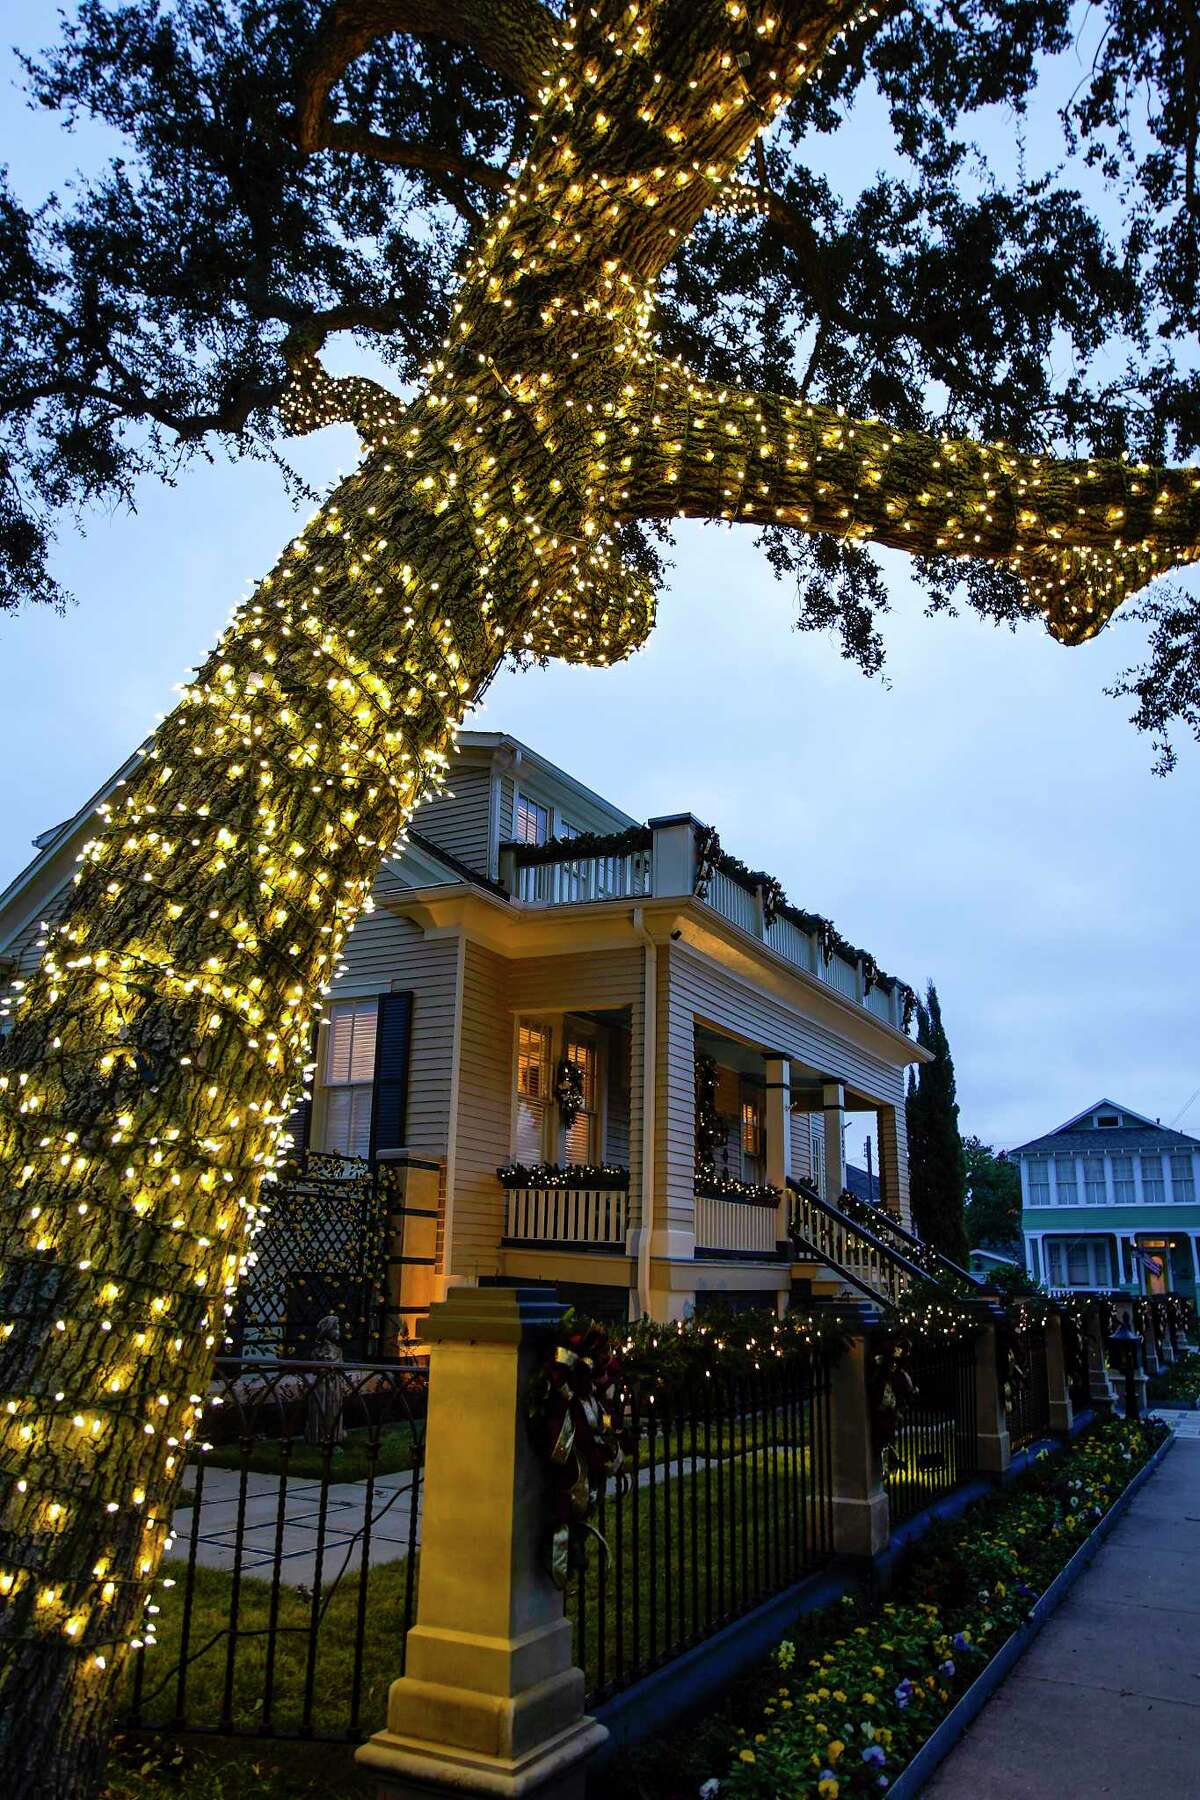 A giant oak tree in the front of Chip and Mary Hosek's Galveston home is aglow in holiday lights. Their home will be on the annual East End Historical District Holiday Home Tour Dec. 2-3.